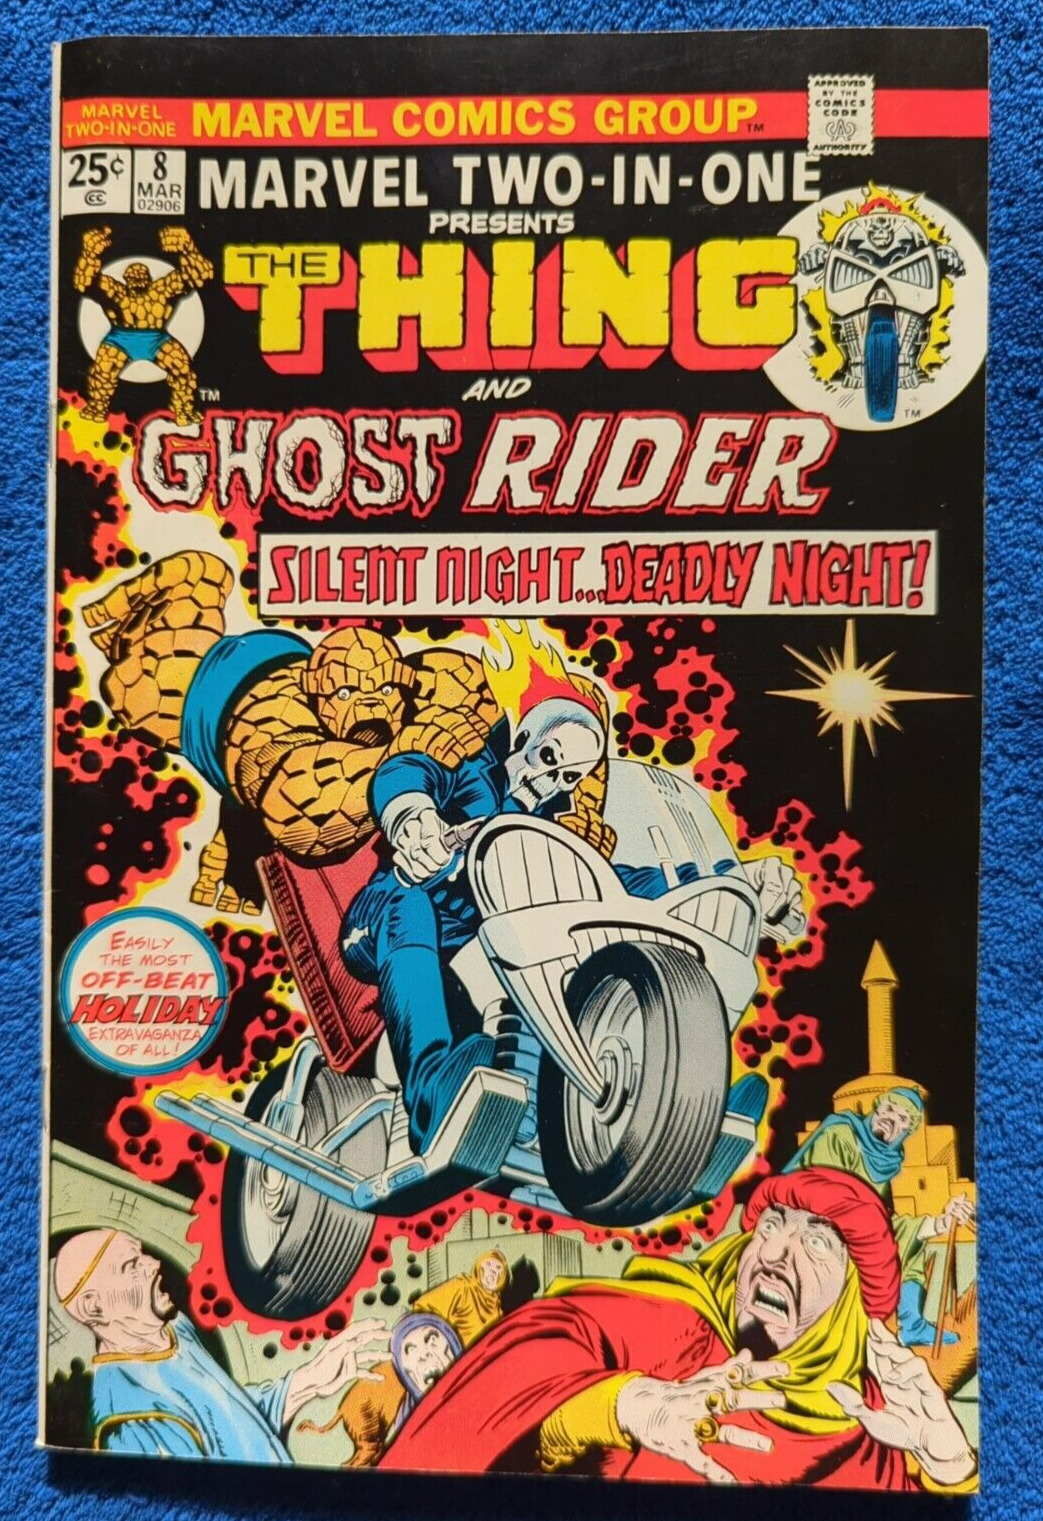 MARVEL TWO-IN-ONE #8. 1974, MARVEL. THE THING AND GHOST RIDER 9.4 NEAR MINT